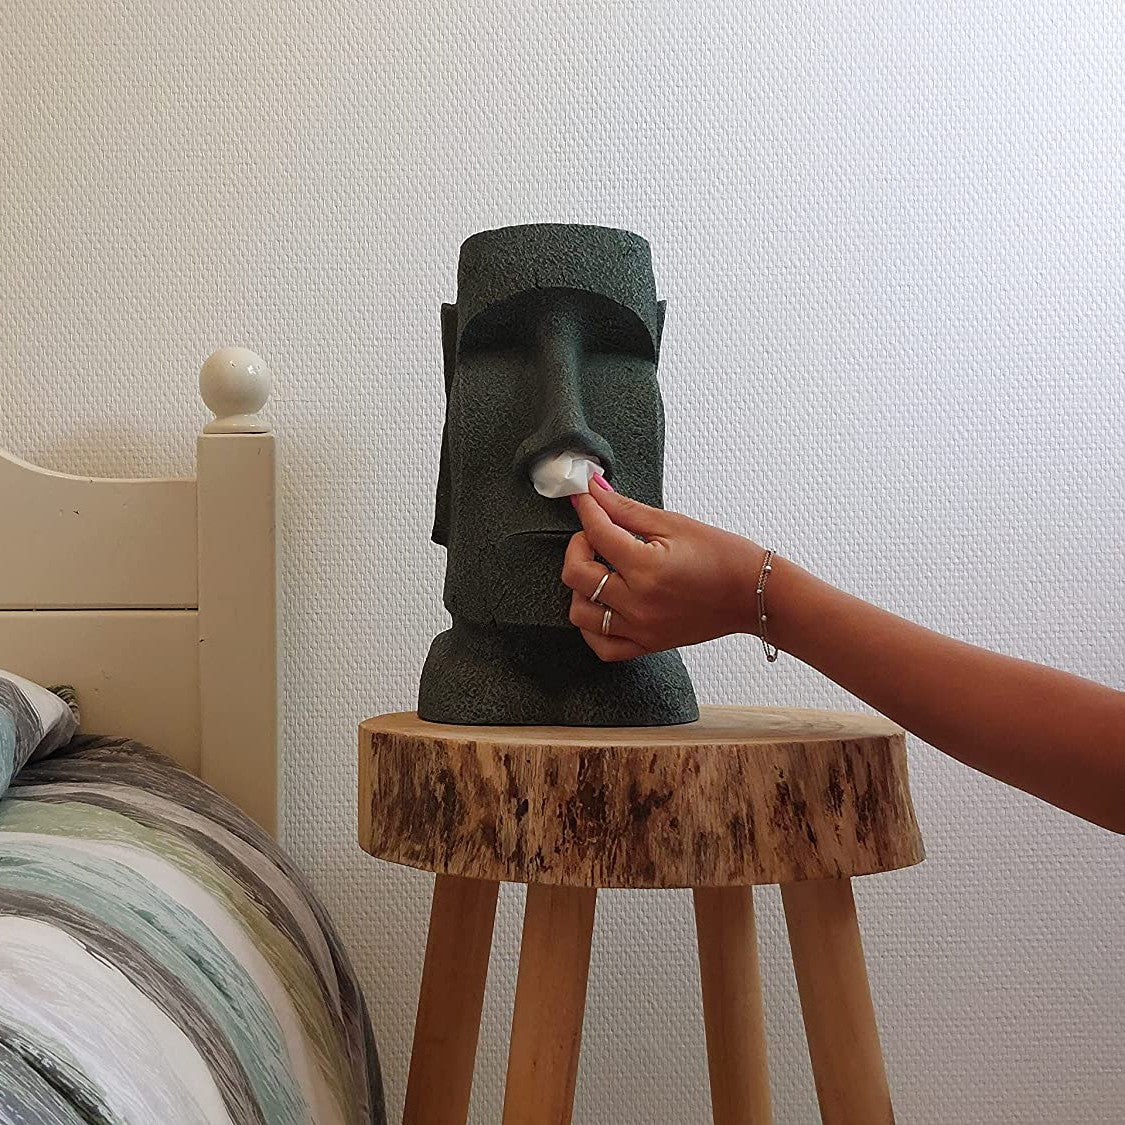 A moai shaped tissue box holder with a hand pulling a tissue out of its nsoe.